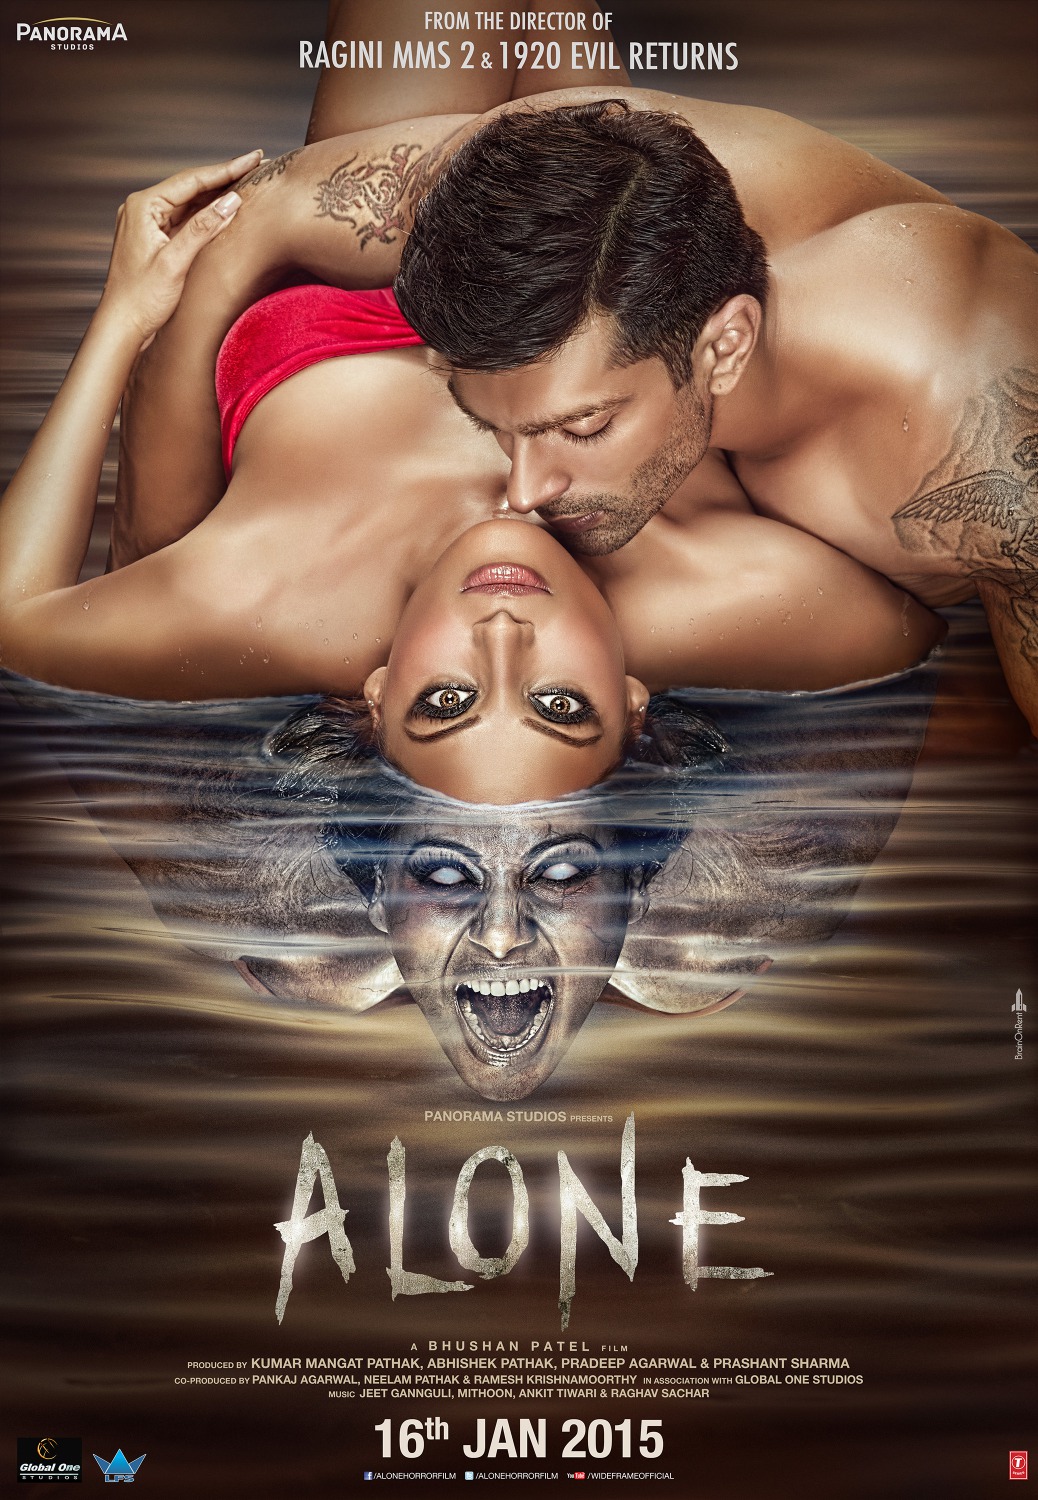 Extra Large Movie Poster Image for Alone (#5 of 5)